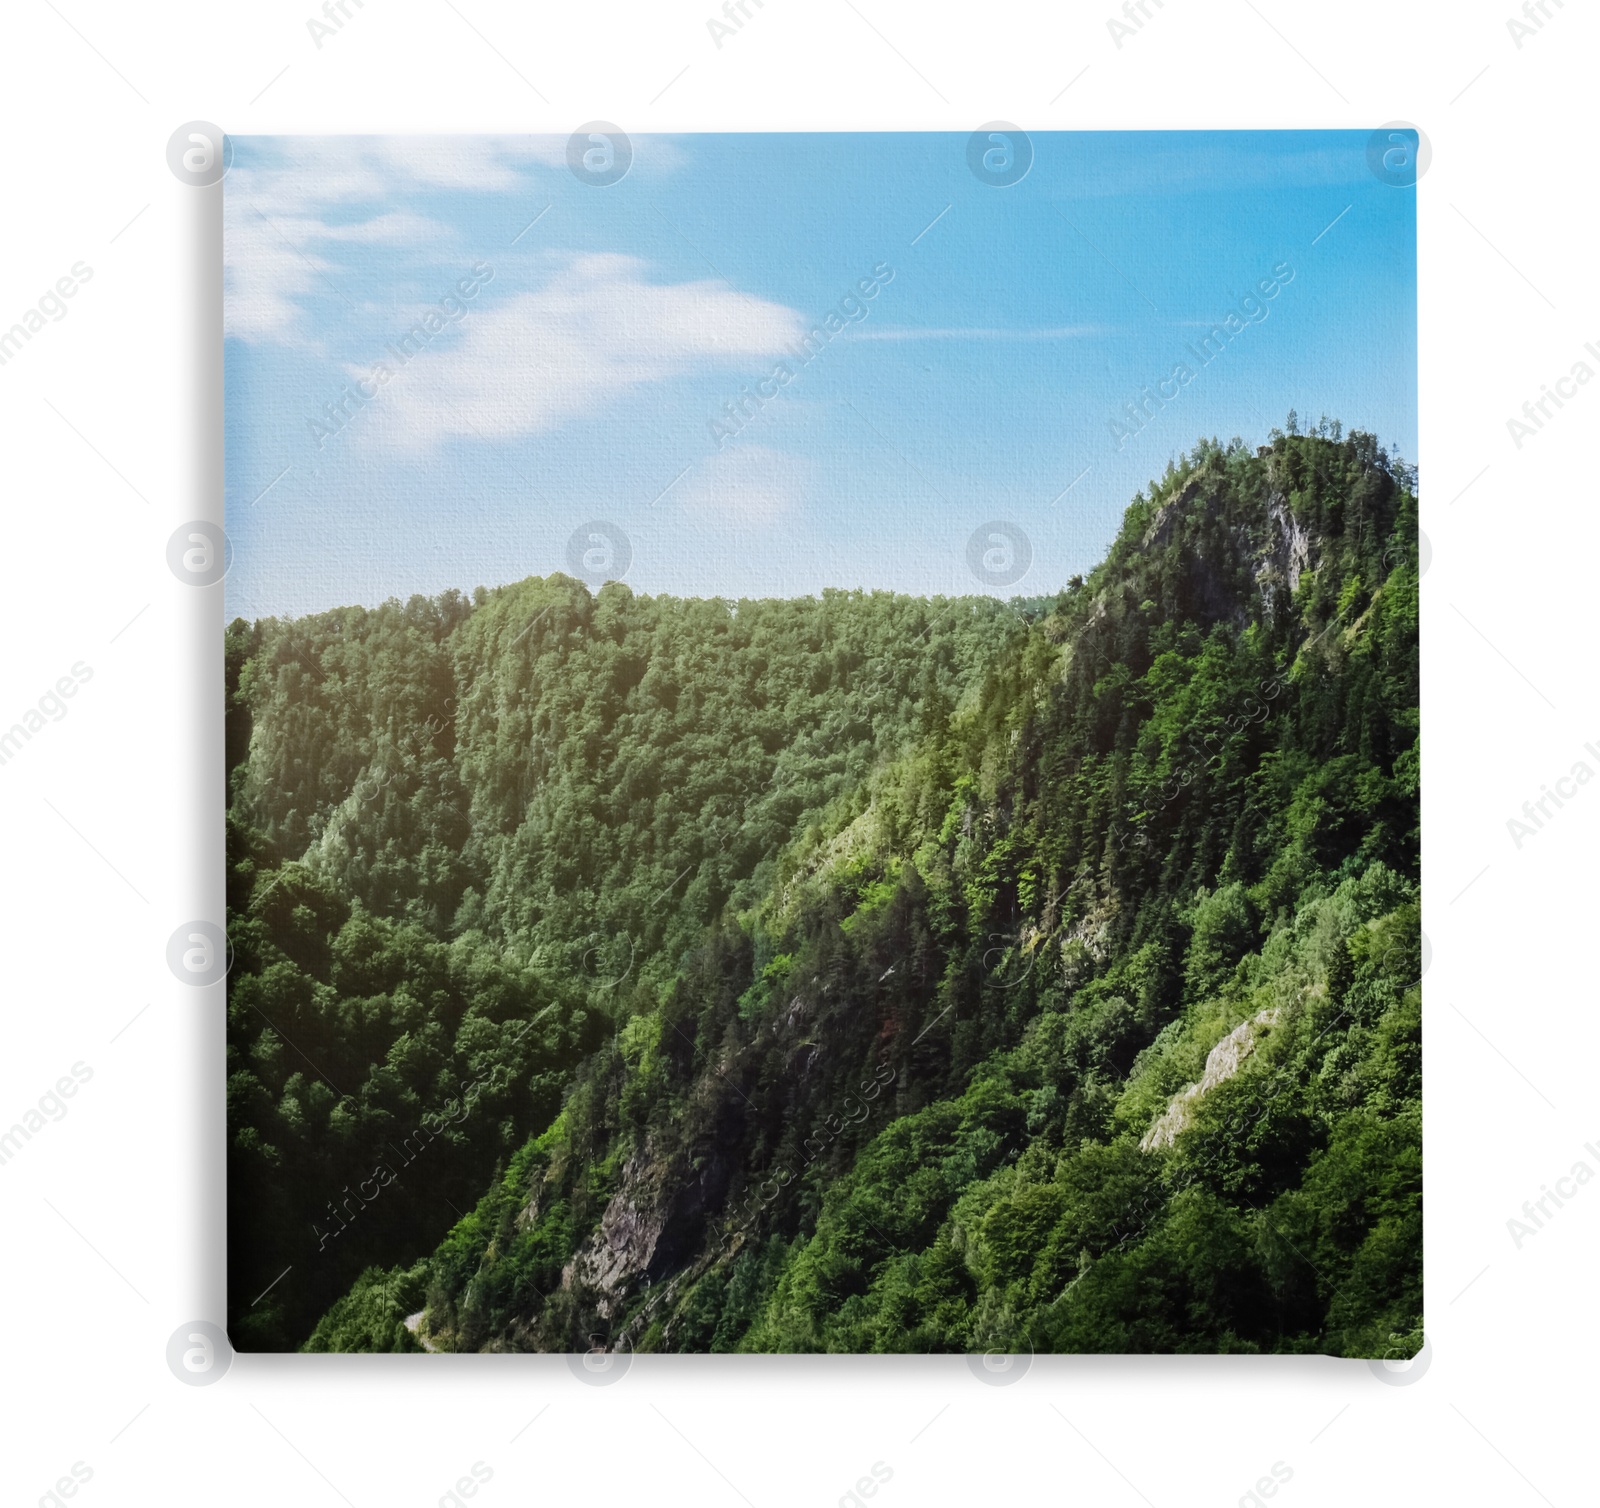 Image of Photo printed on canvas, white background. Picturesque view of beautiful mountains on sunny day